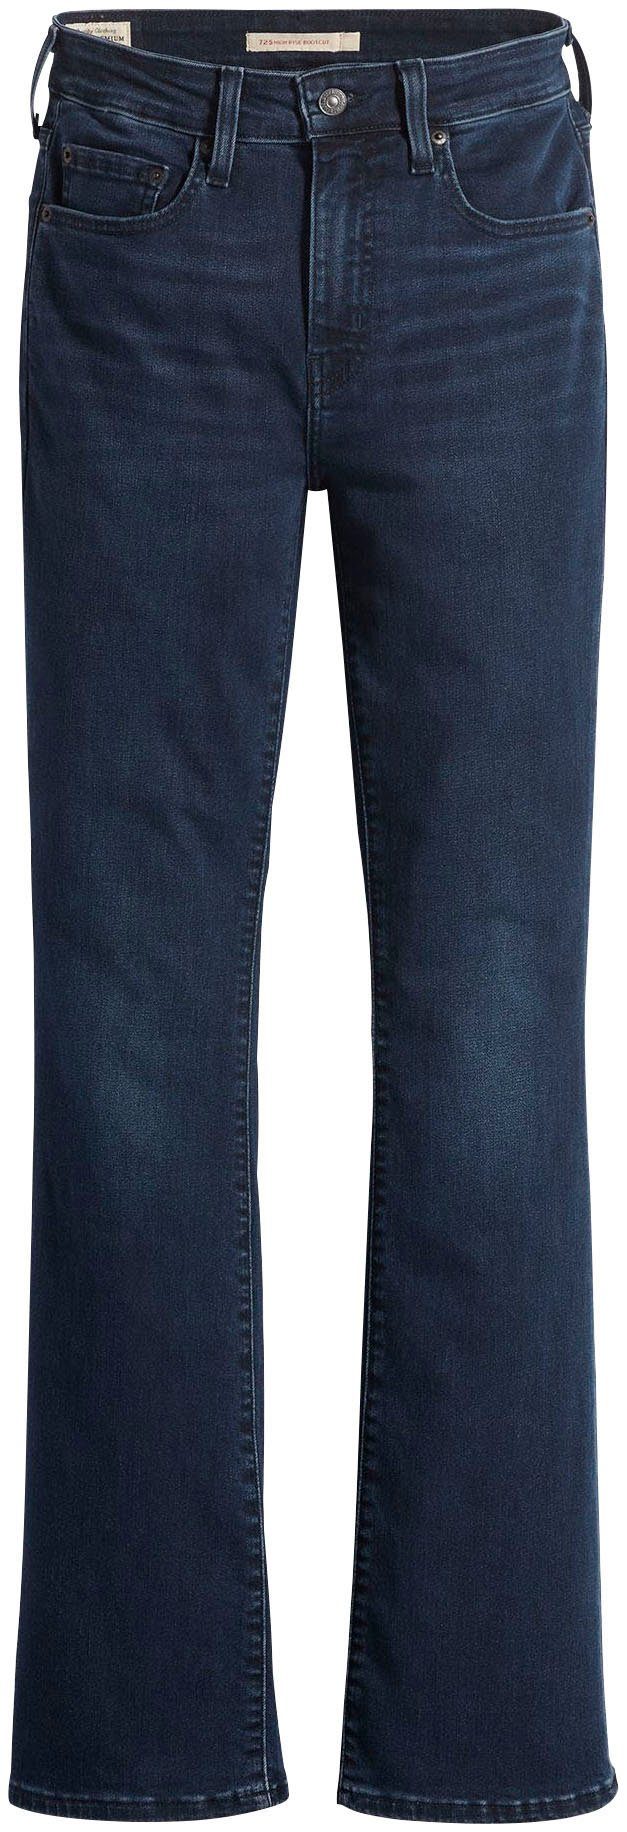 Levi's Bootcut jeans 725 High-Rise Bootcut